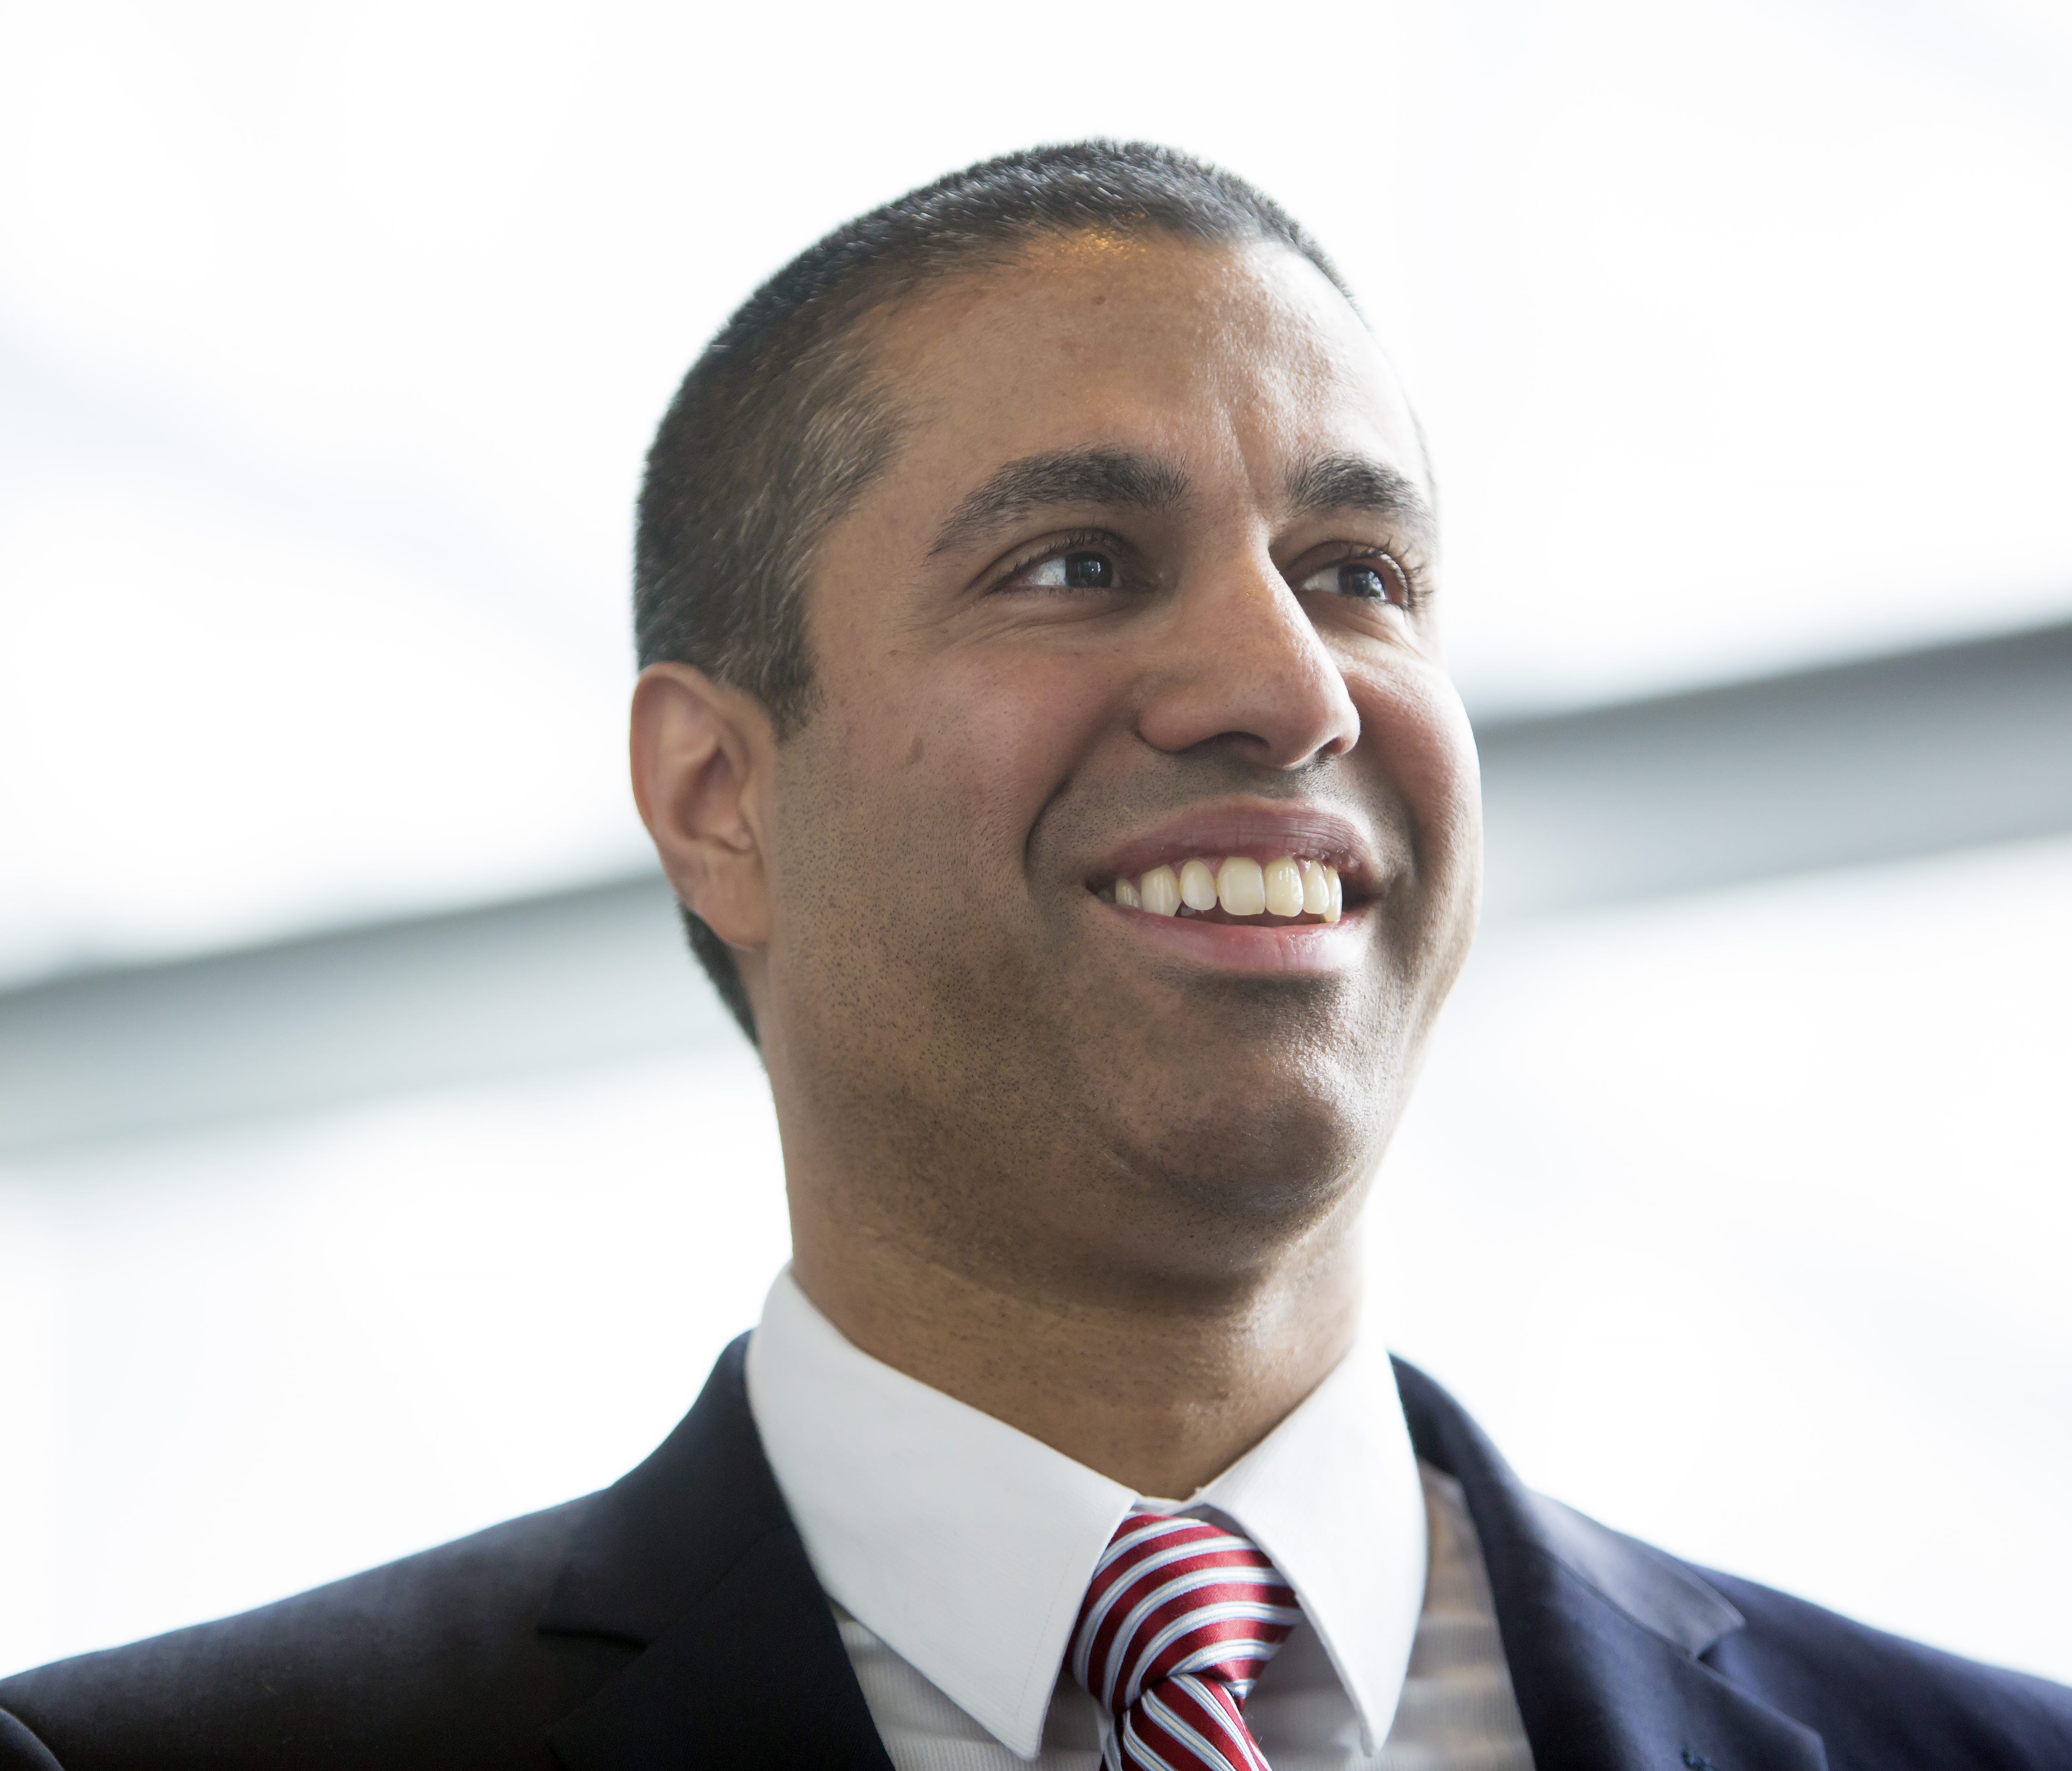 Federal Communications Commission Chairman Ajit Pai before speaking at an internet regulation event at the Newseum April 26, 2017 in Washington, DC.